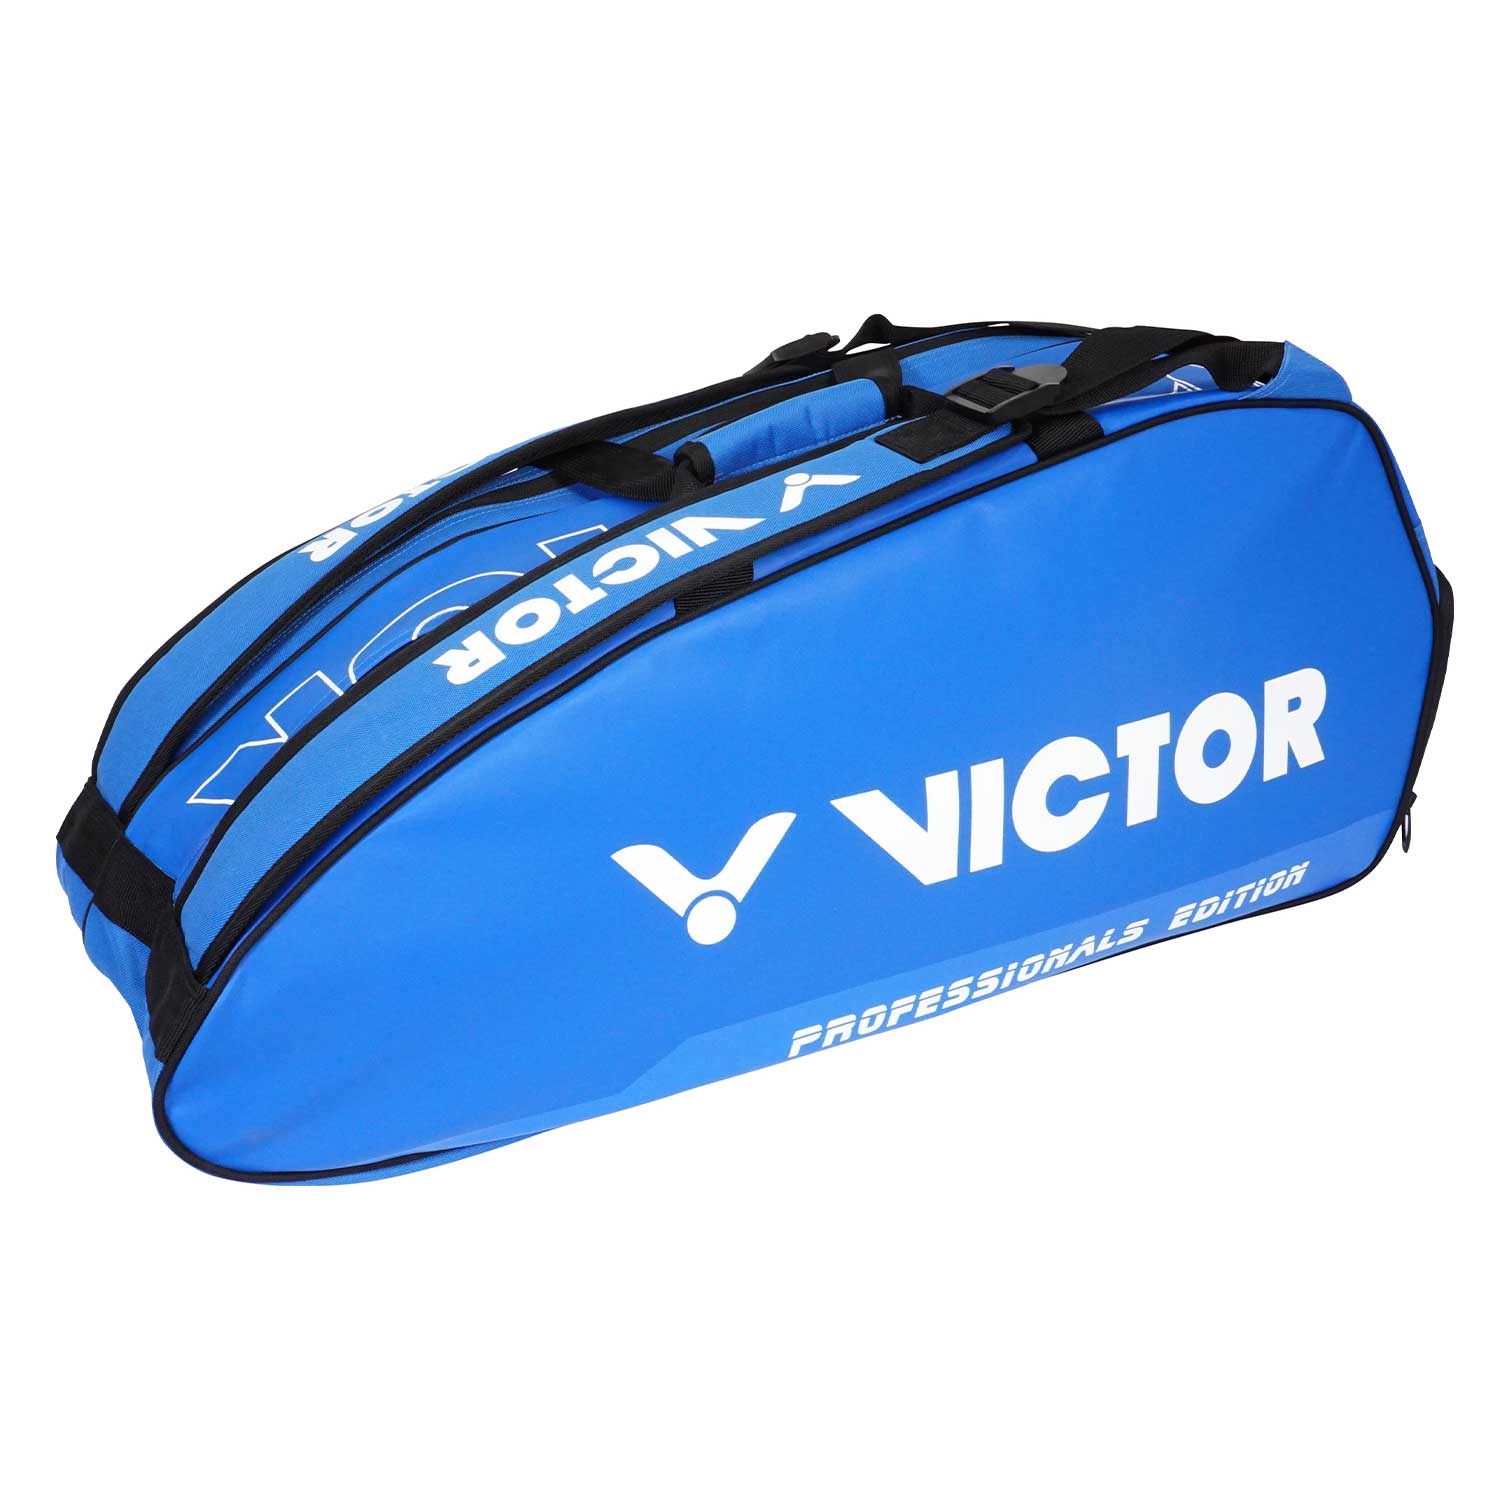 DOUBLETHERMO BAG 9111 BLUE